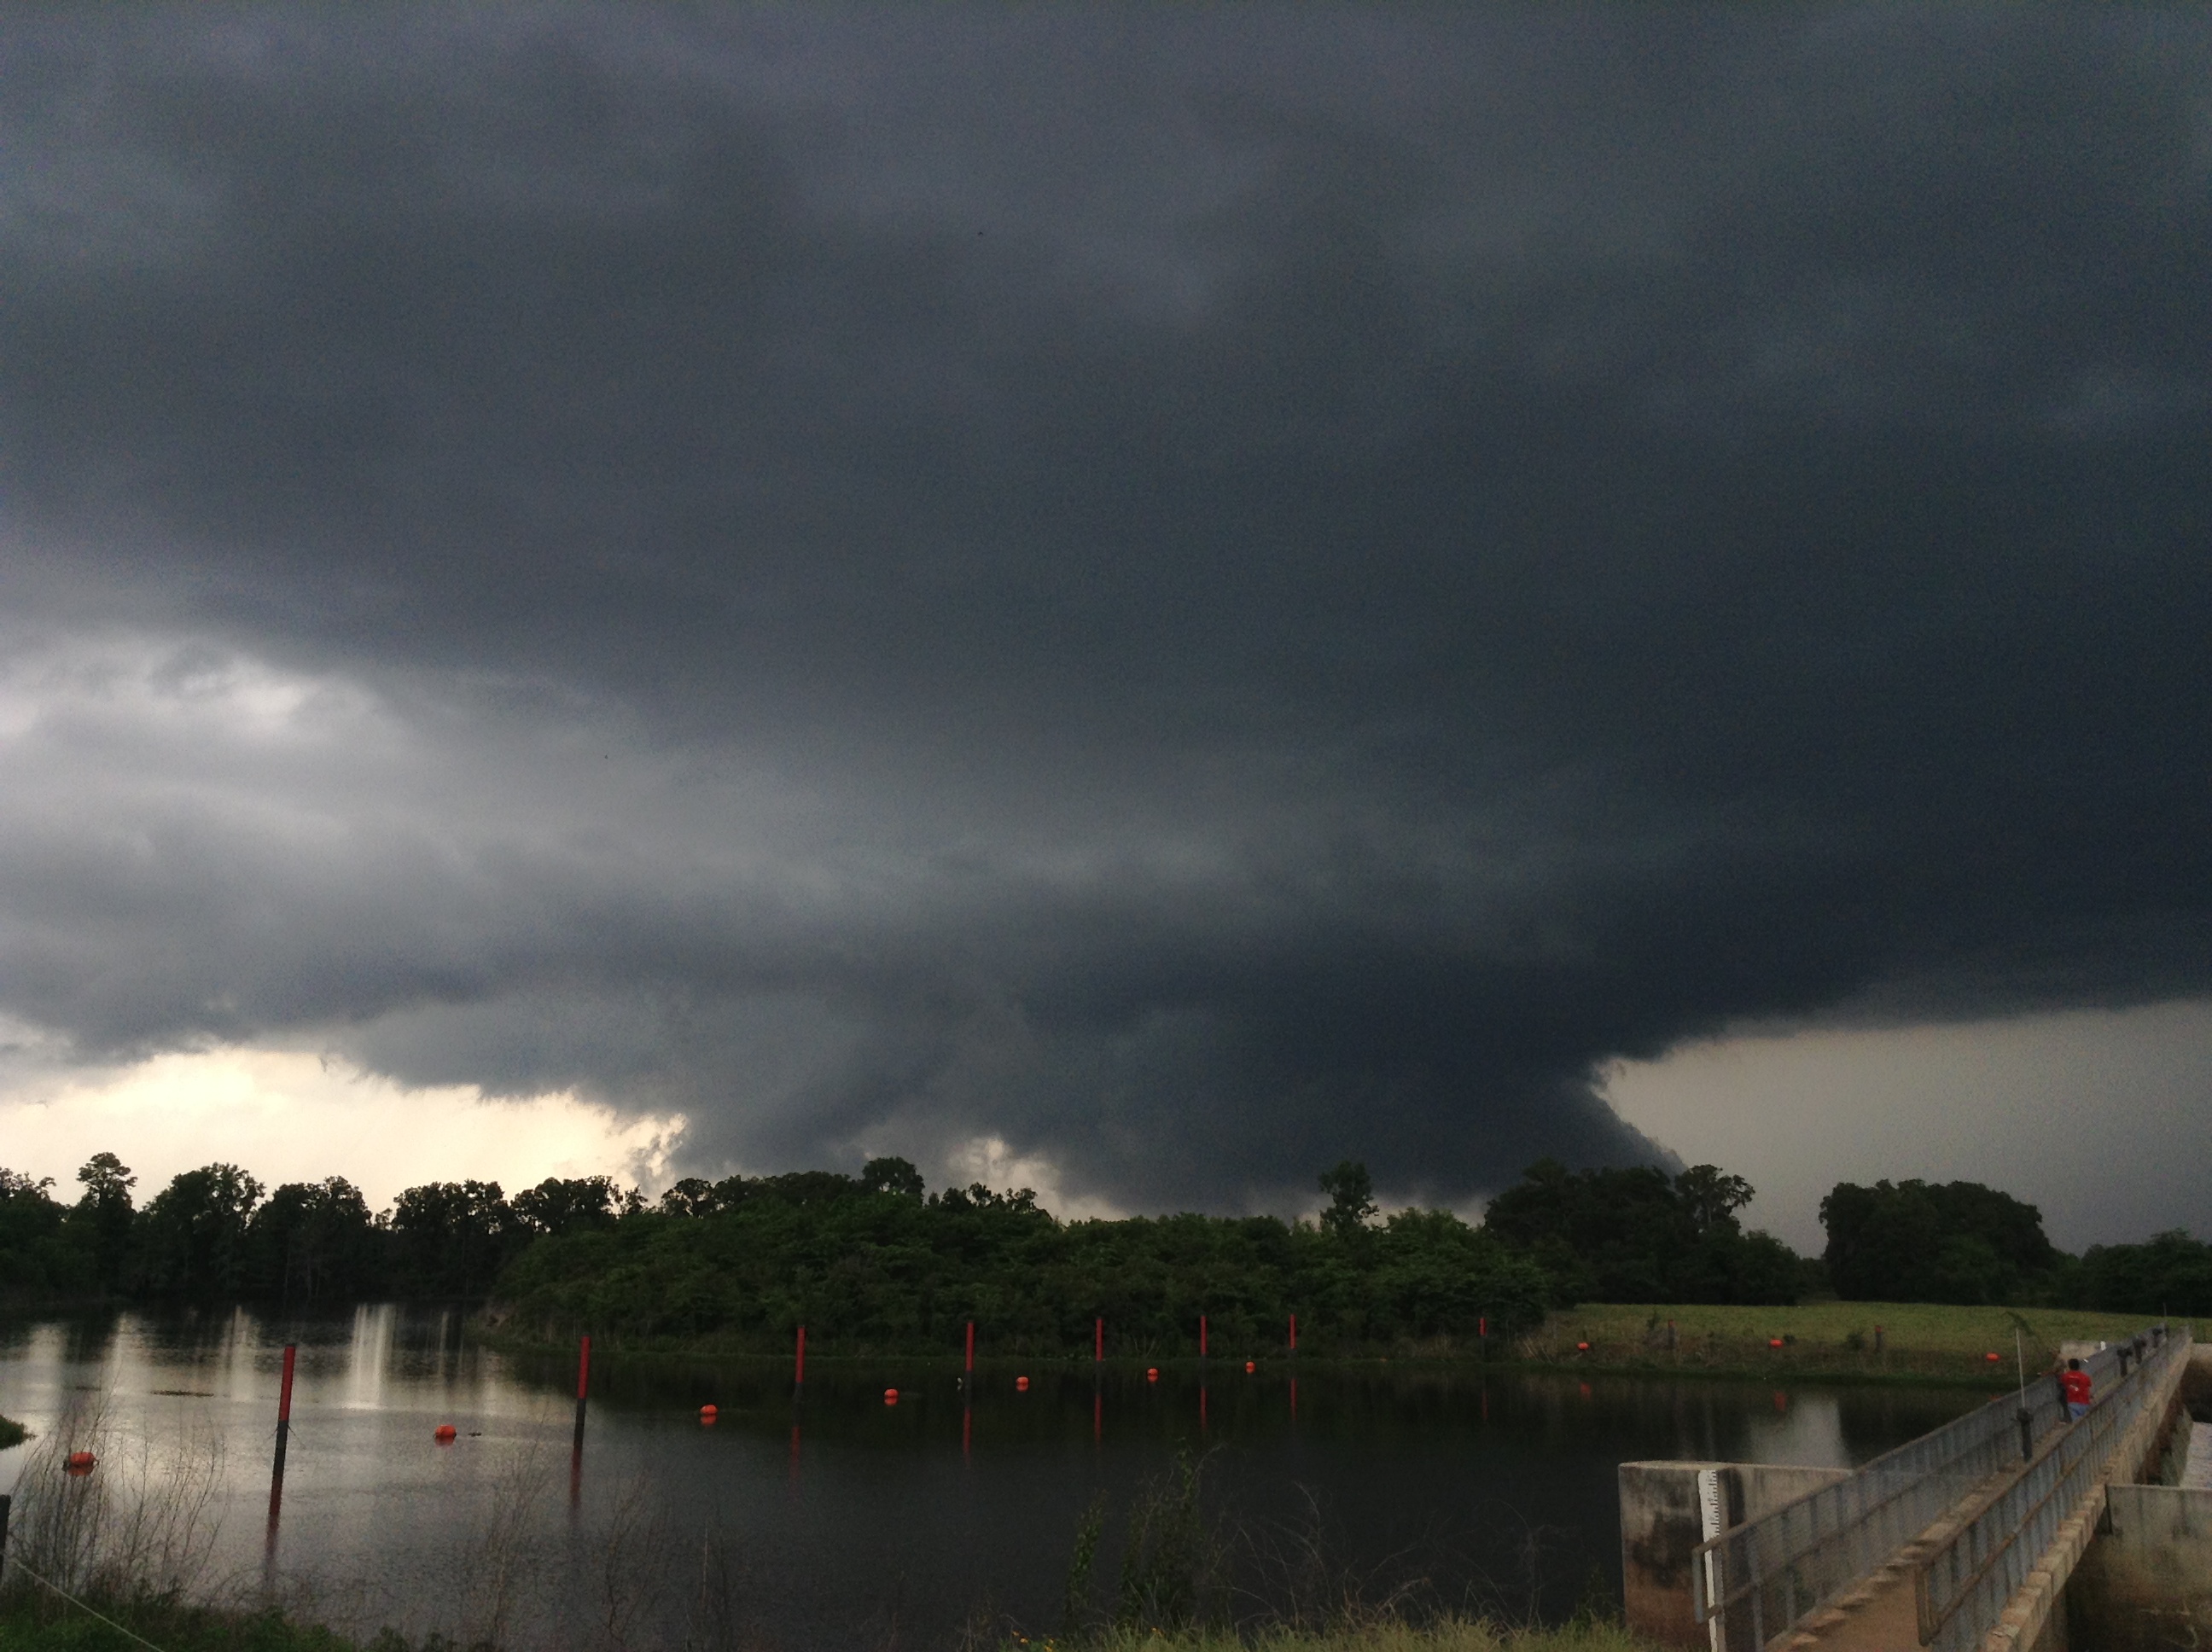 Wall cloud northeast of Natchitoches, LA